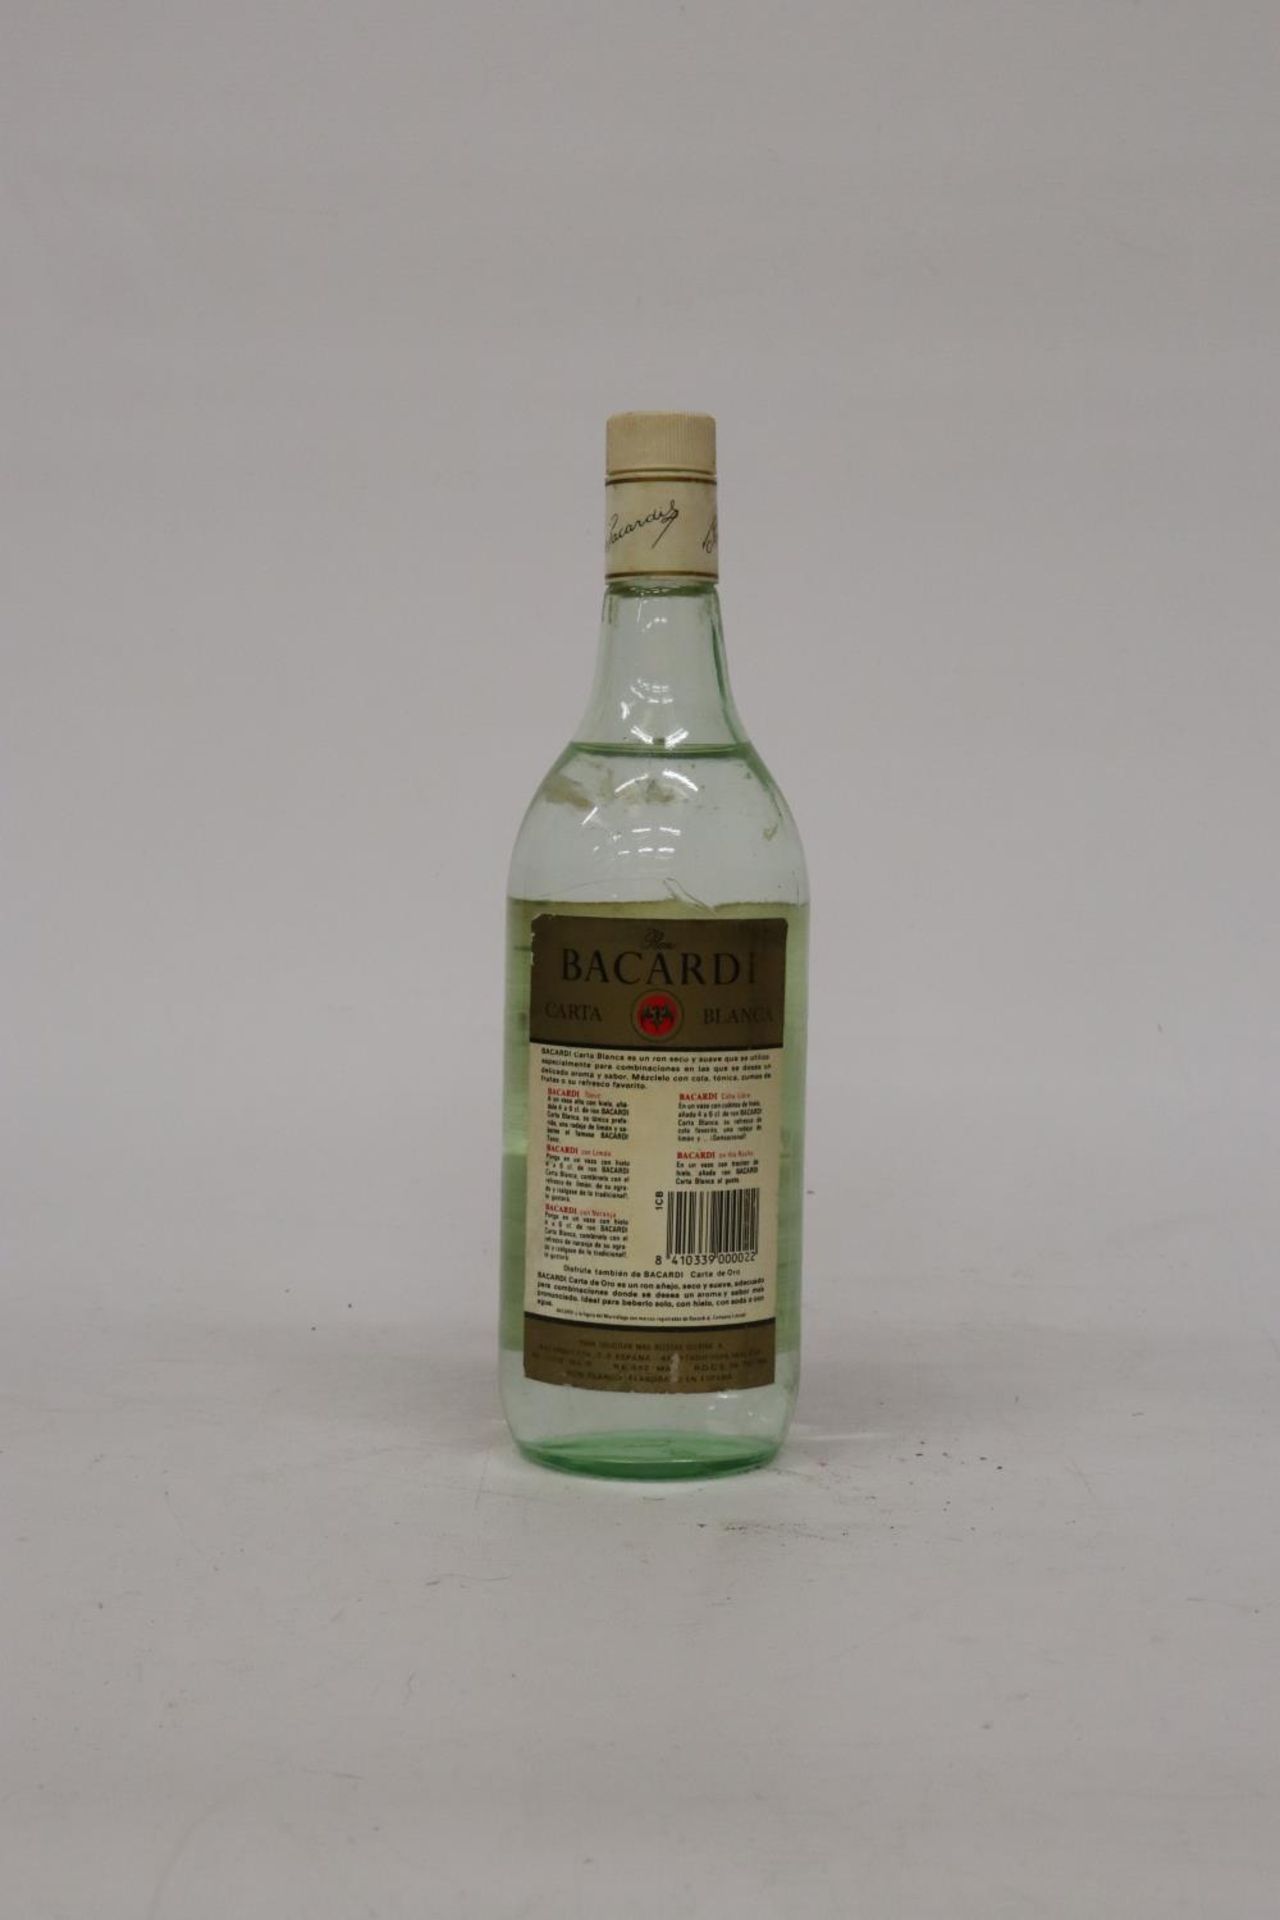 A 1L BOTTLE OF CARTA BLANCA RON SUPERIOR BACARDI - Image 3 of 4